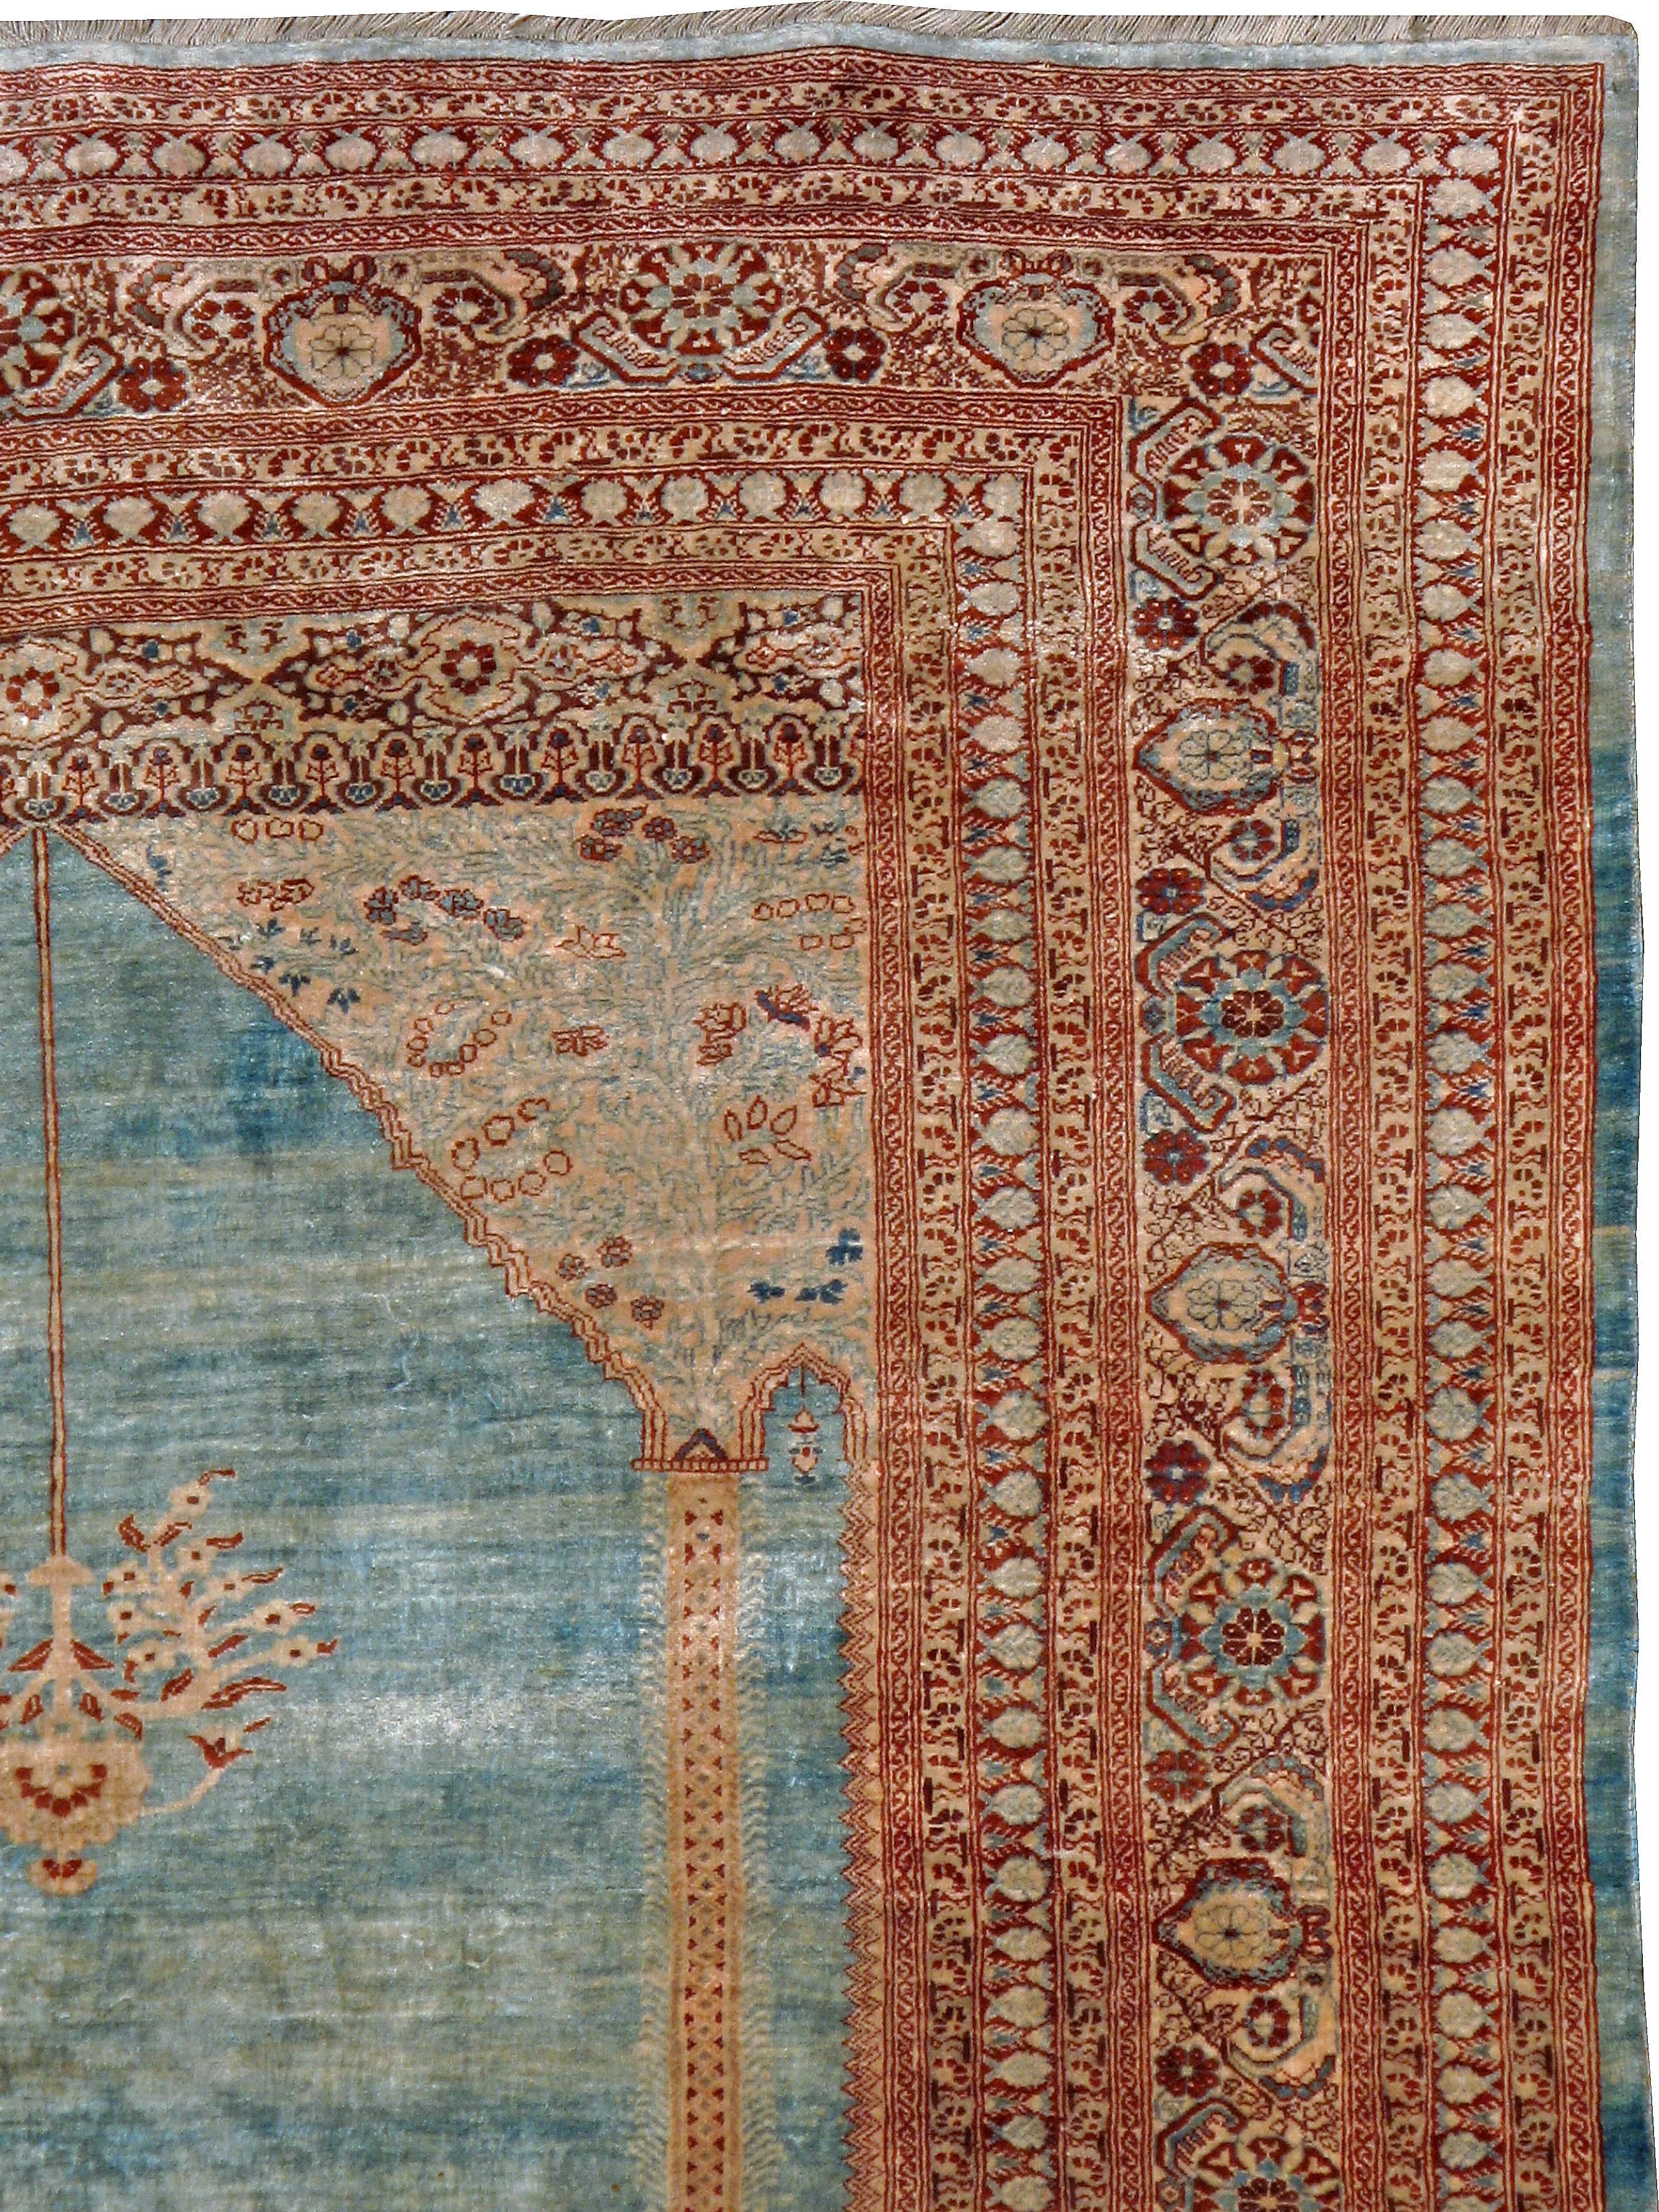 An antique Persian silk Tabriz carpet from the turn of the 20th century.